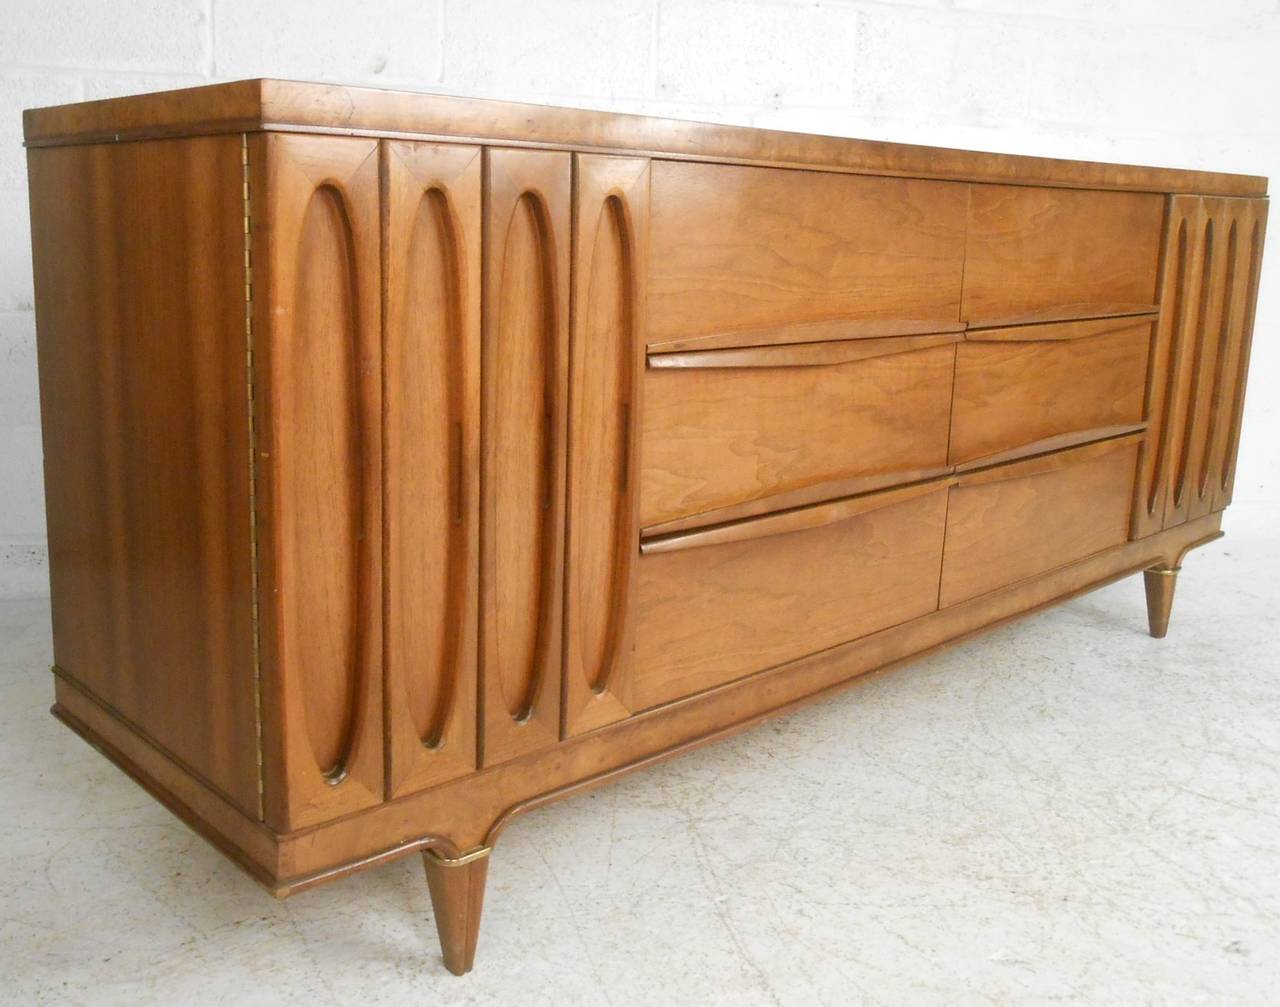 Quality Mid-Century construction by American of Martinsville combines with plenty of storage to make this a wonderful addition to any interior. Please confirm item location (NY or NJ).